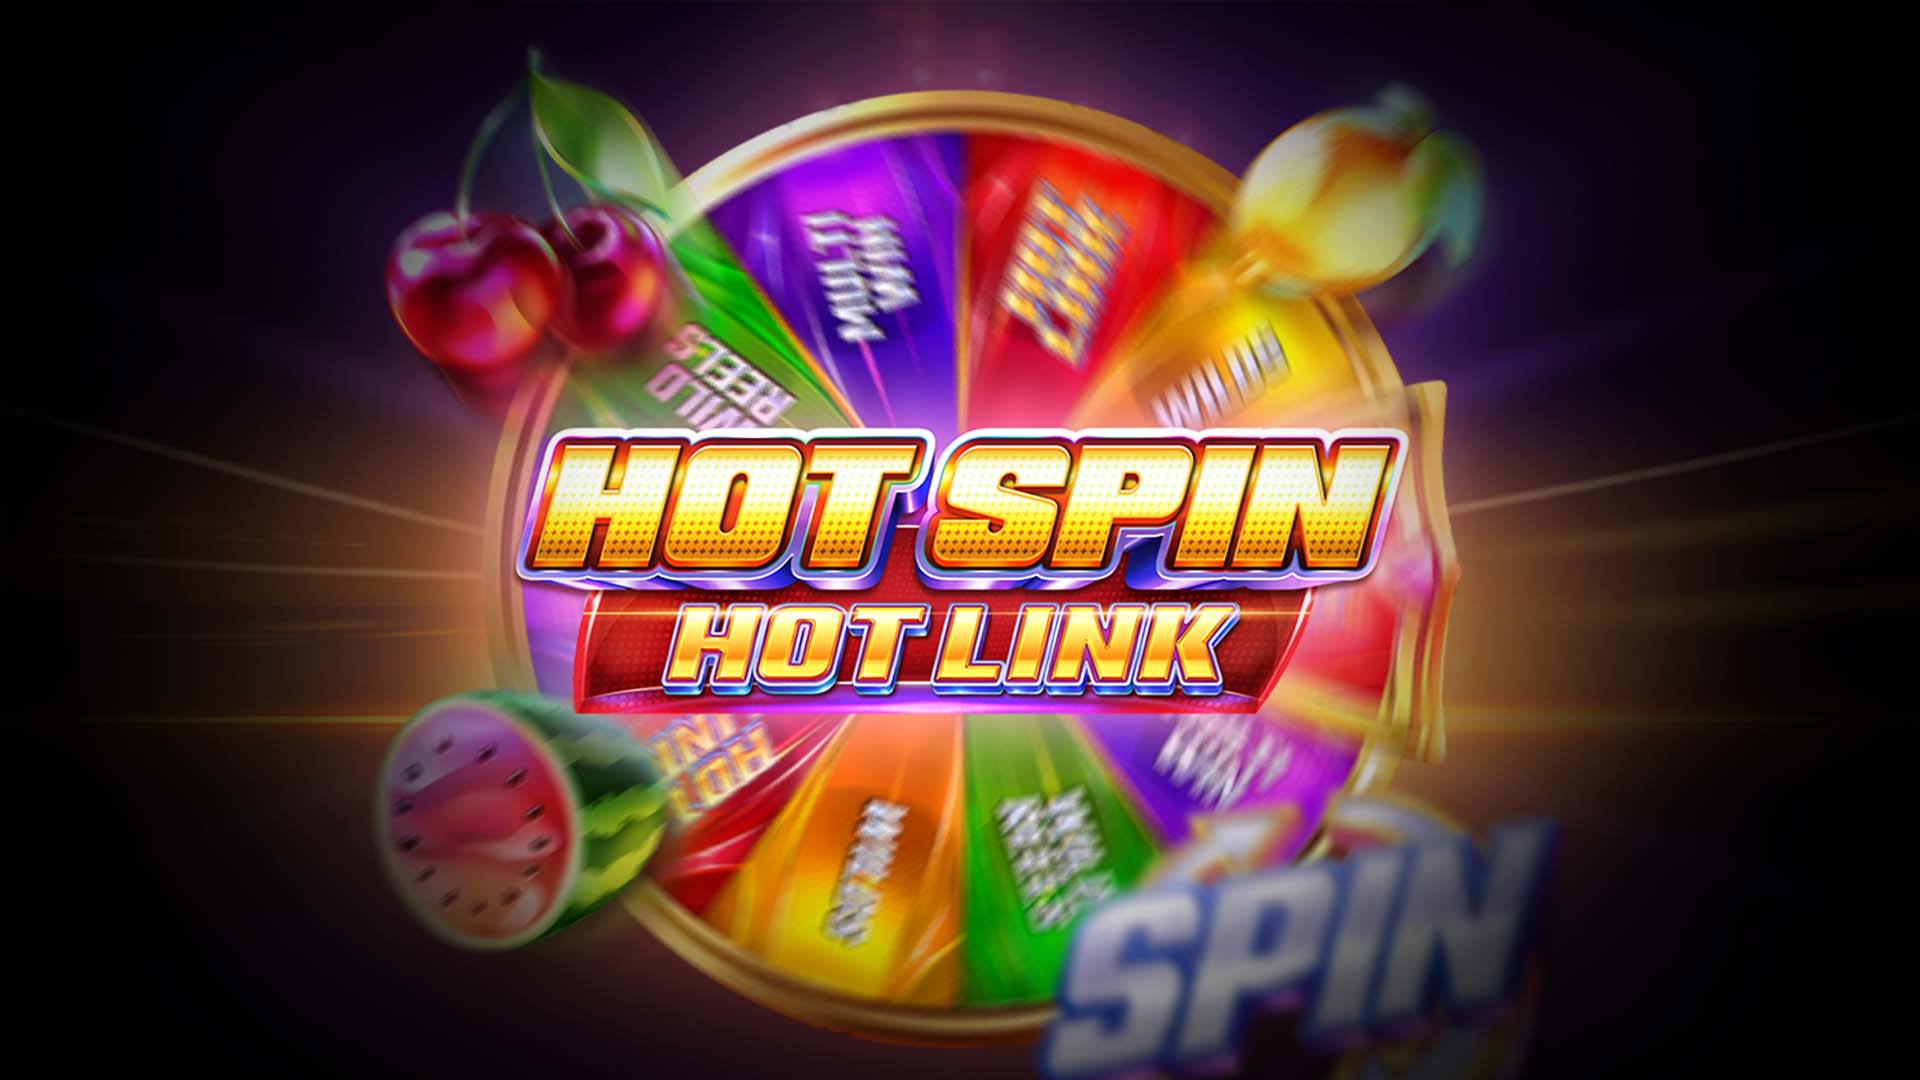 Hot Spin Hot Link - iSoftBet_D78436_aRP - MGA - EXCLUSIVE_RP_promo_lobby_D78427_MC_102121.jpg